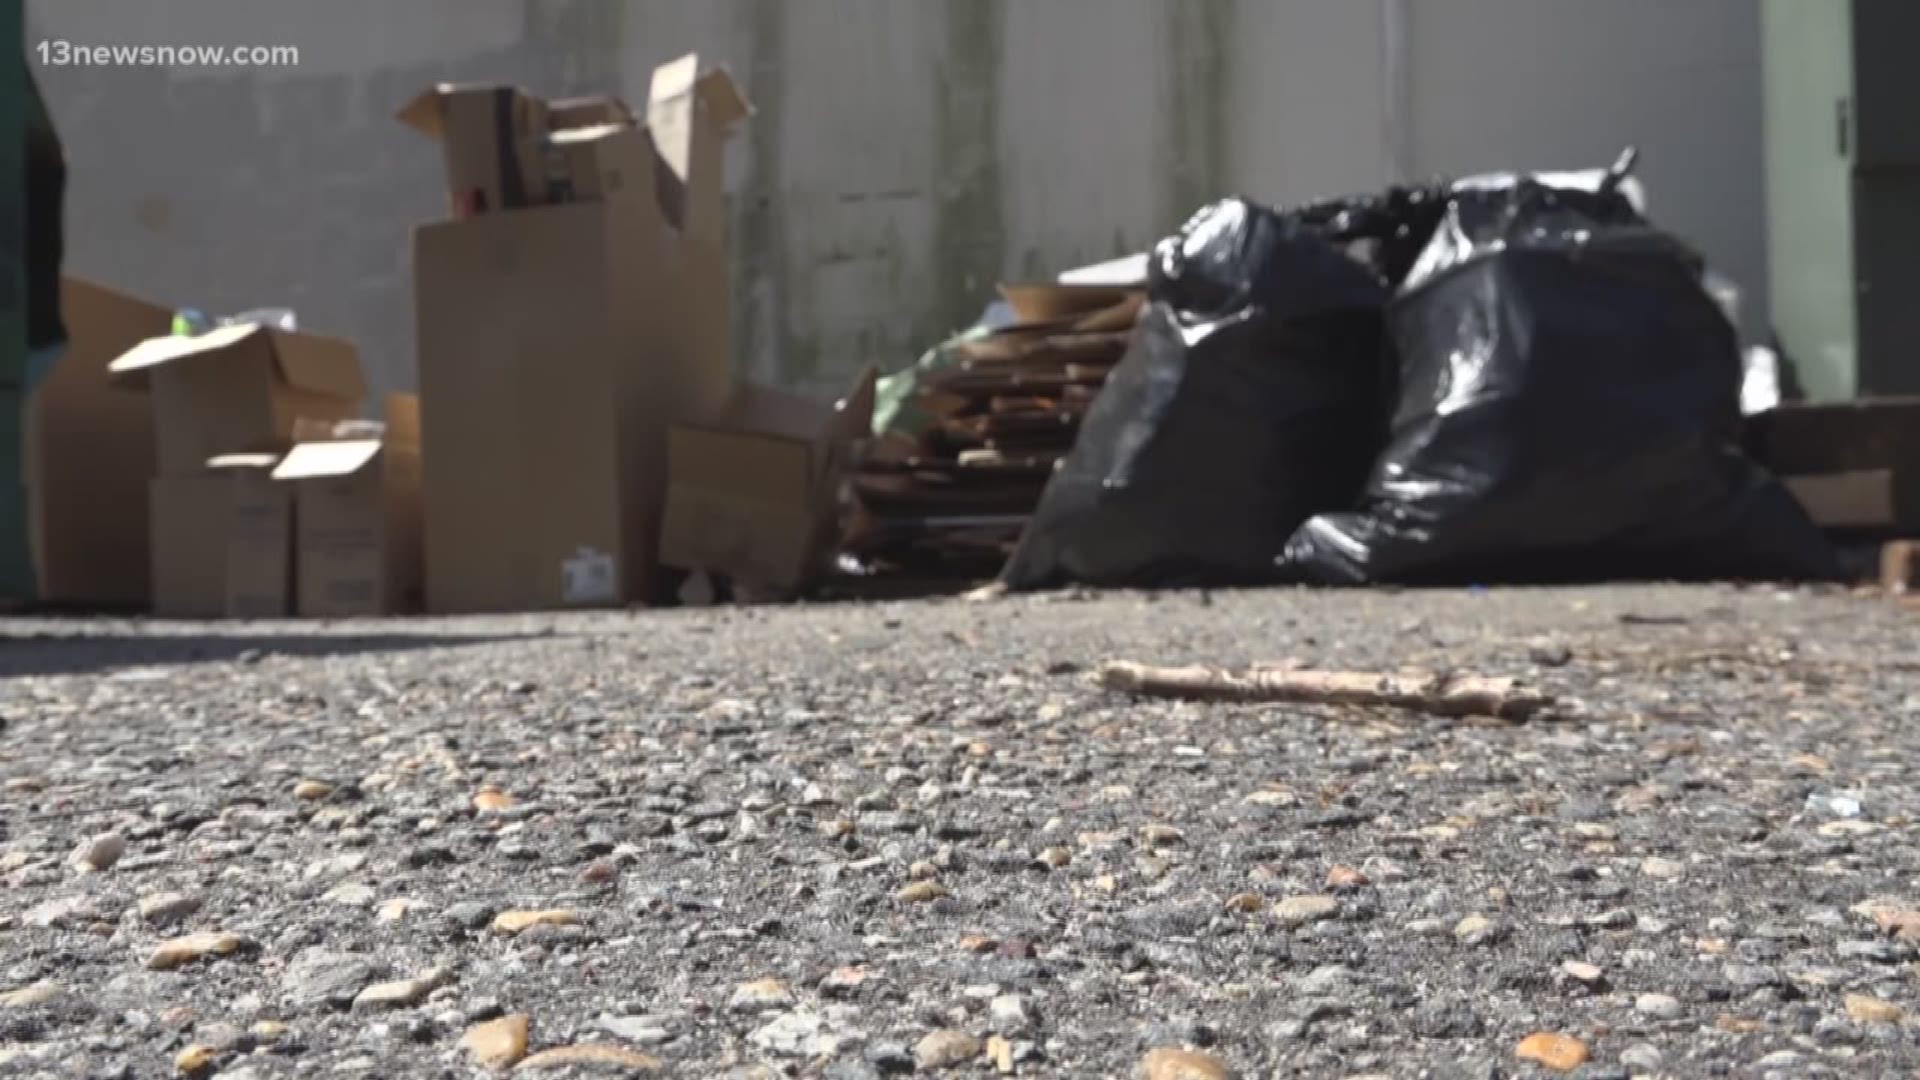 York County businesses are paying because people are dumping trash, including furniture and tires, in or around their dumpsters costing them a fee with Waste Management.